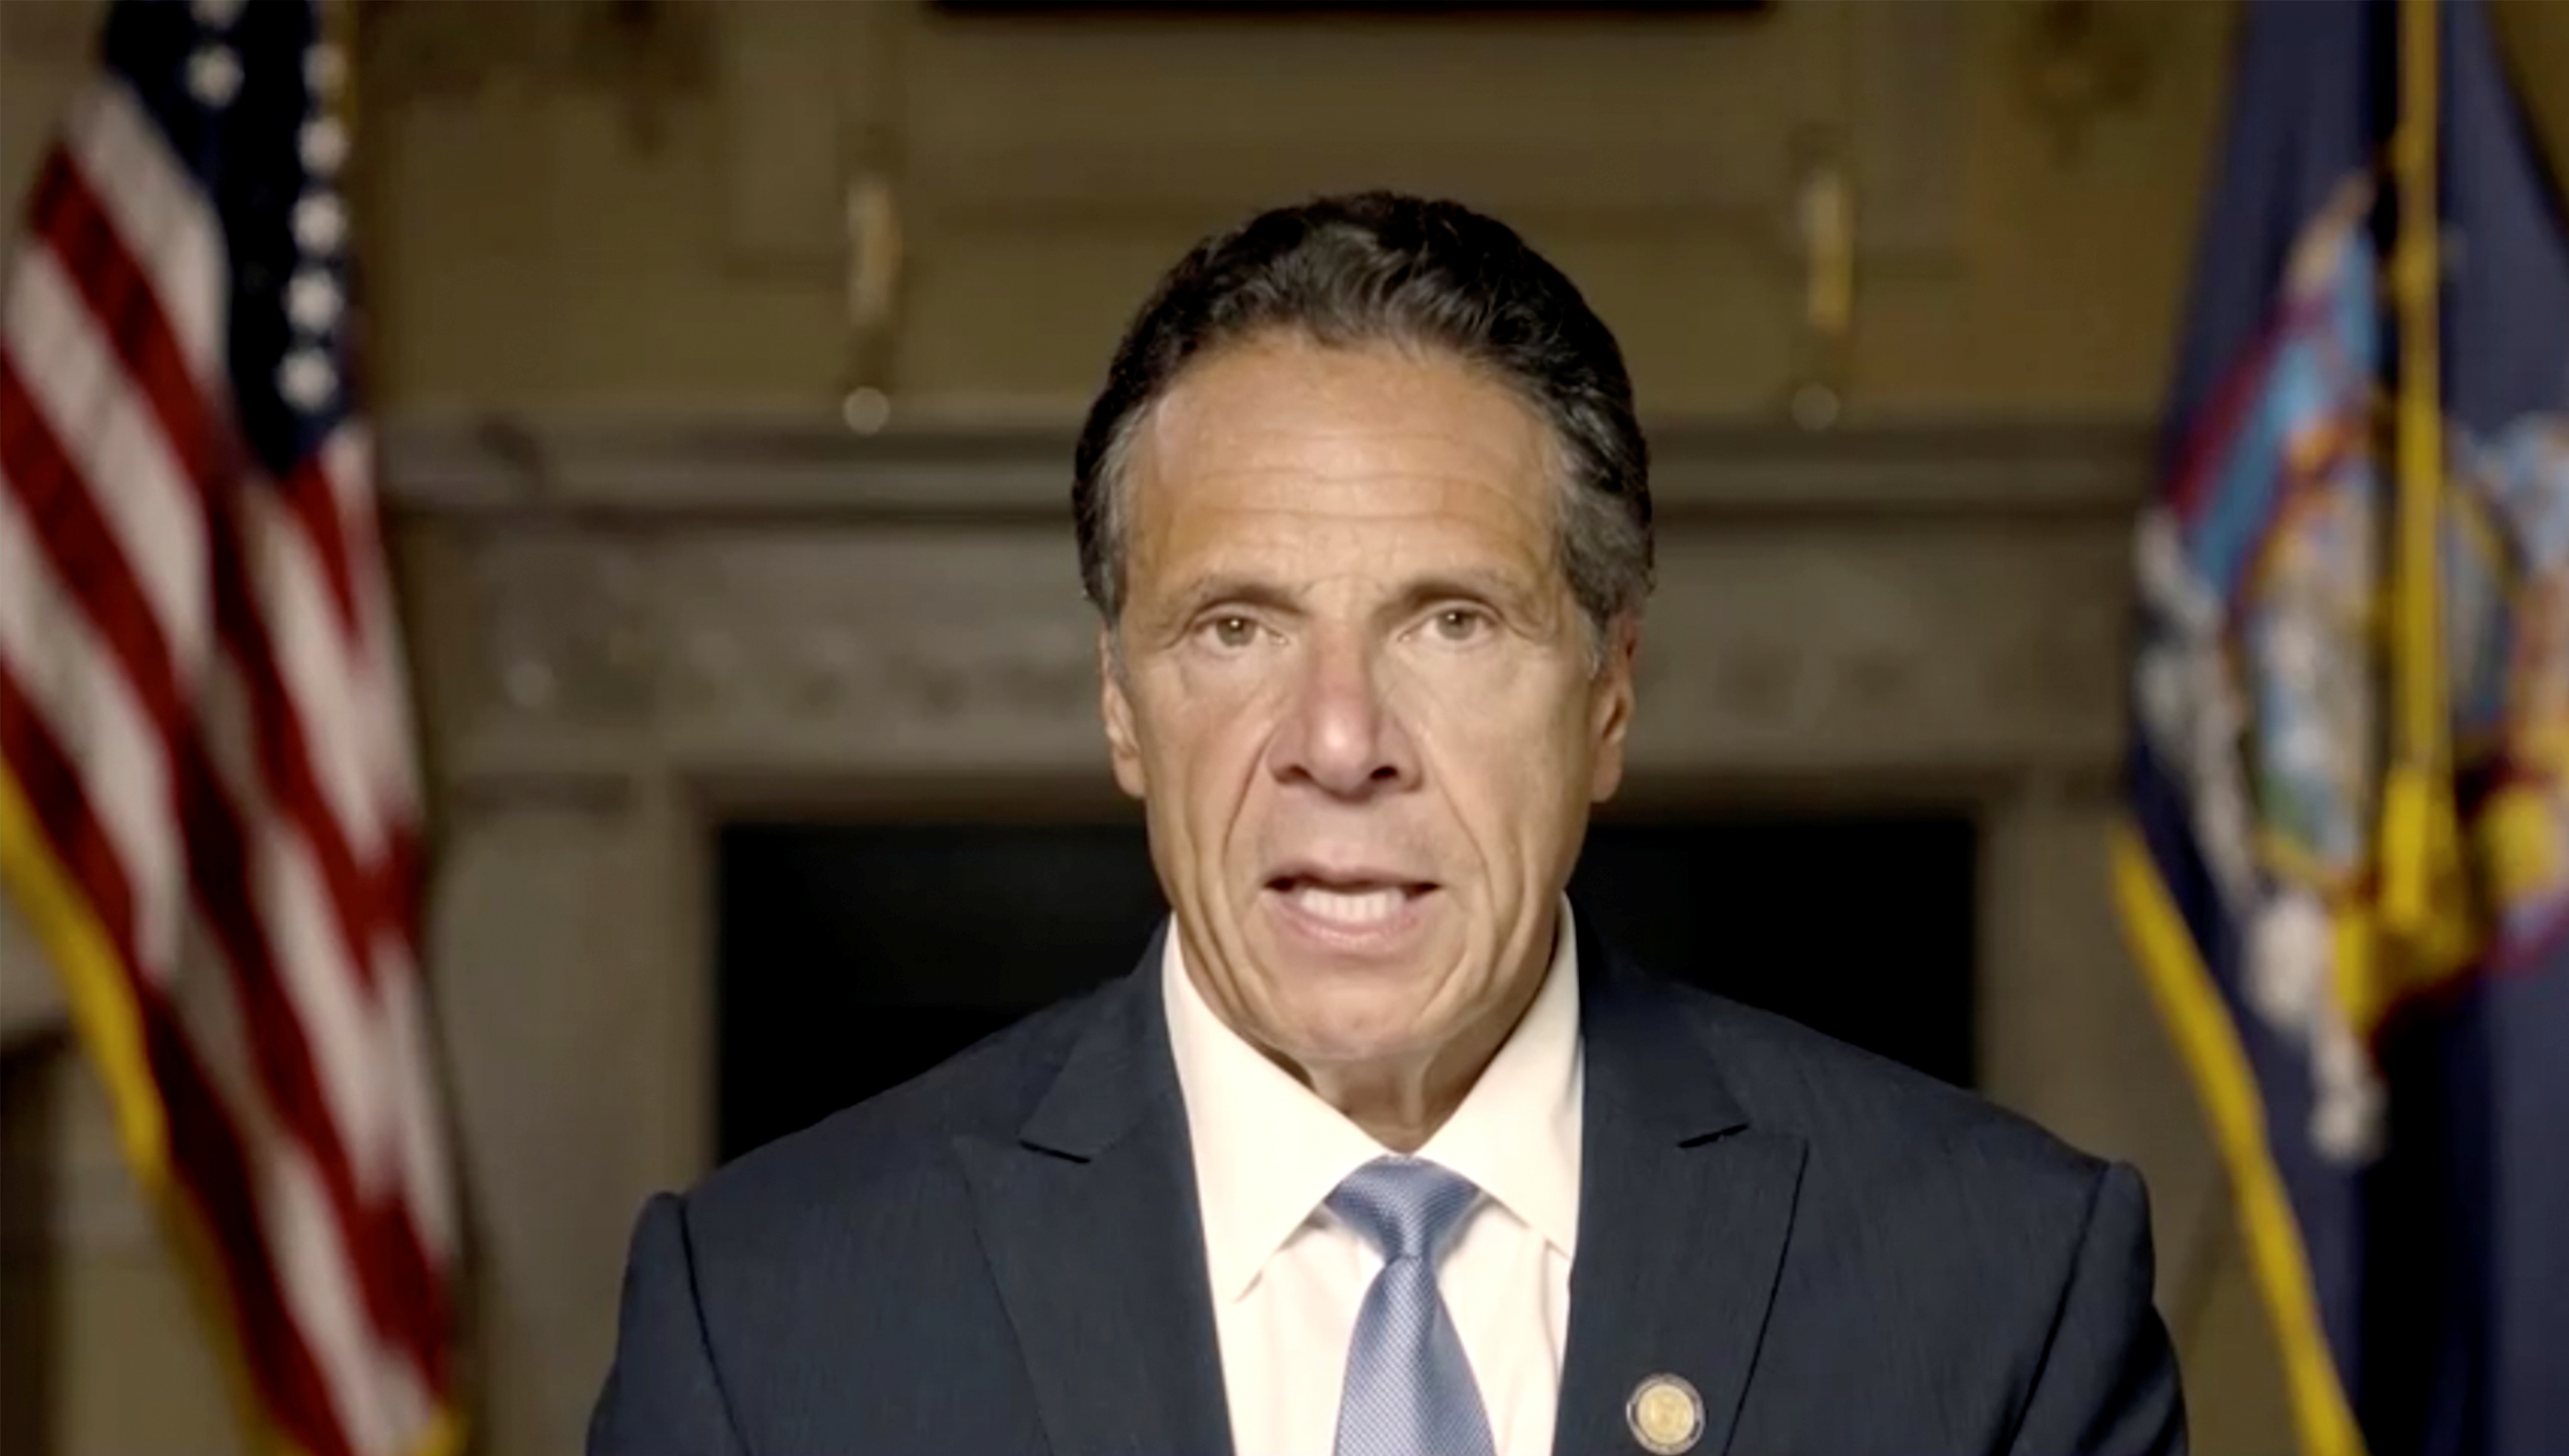 New York Governor Andrew Cuomo makes a statement in this screen grab taken from a pre-recorded video released by Office of the NY Governor, in New York, U.S., August 3, 2021.  Office of Governor Andrew M. Cuomo/Handout via REUTERS/File Photo